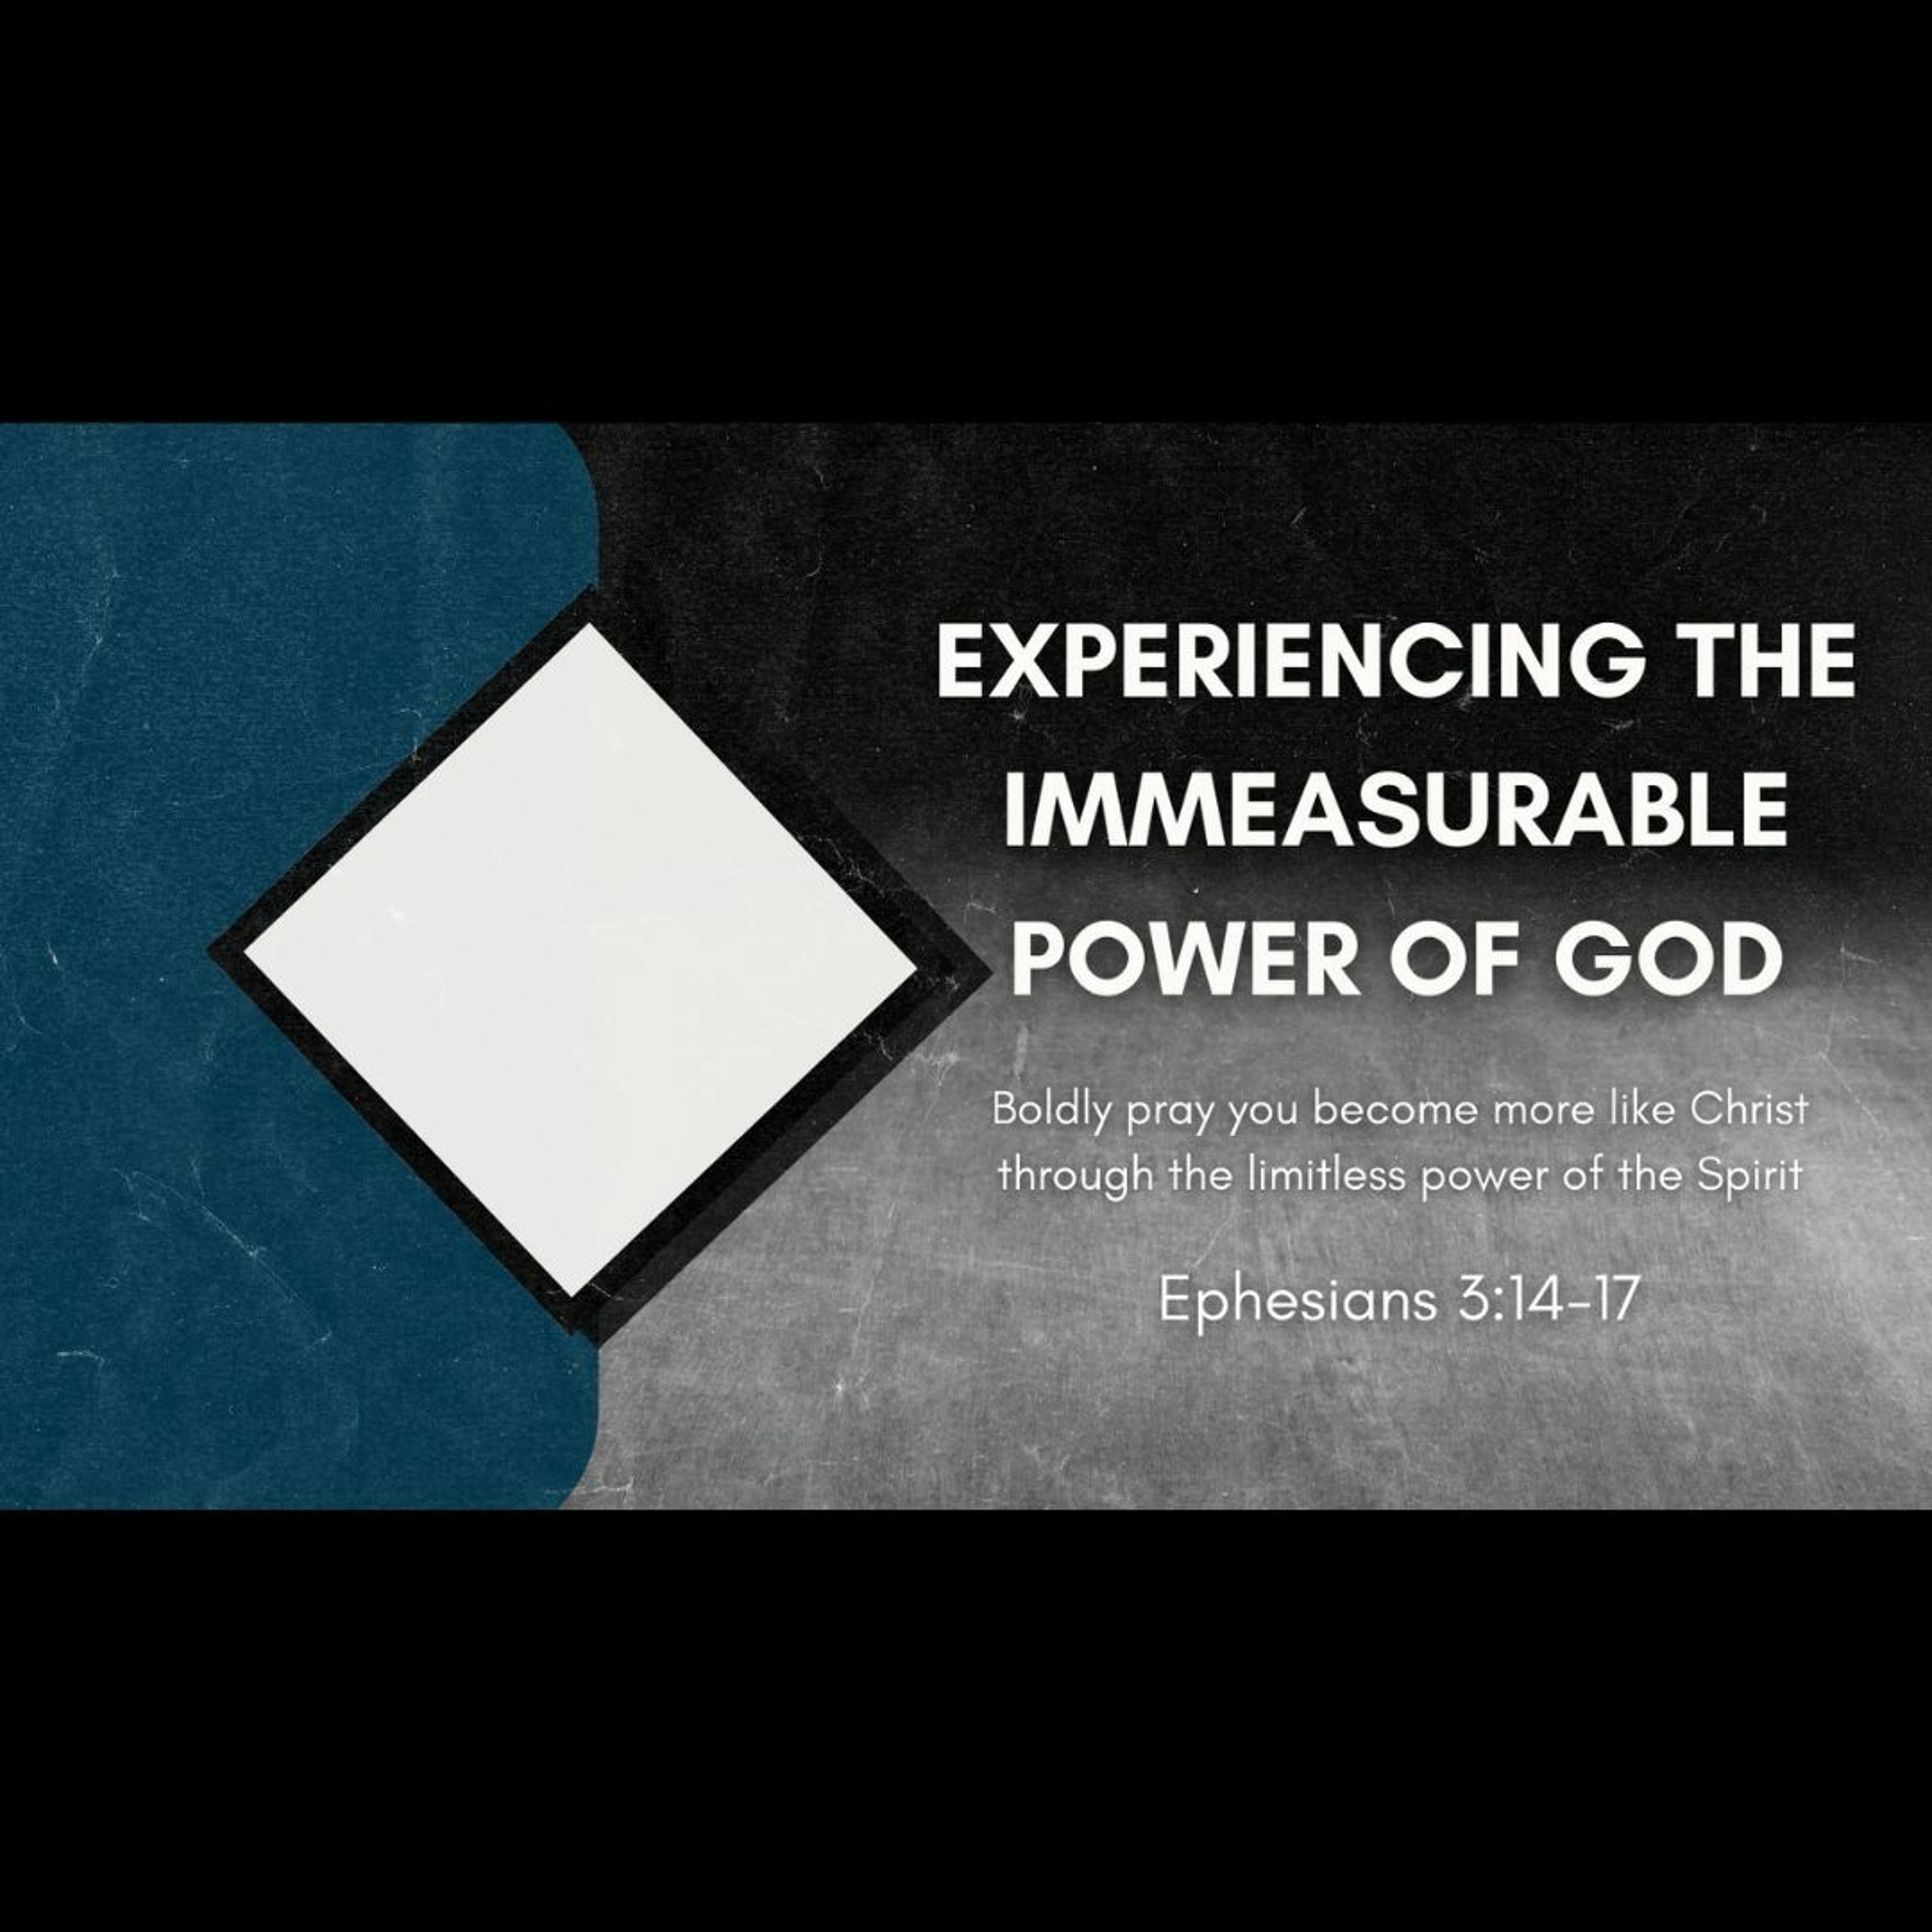 Experiencing the Immeasurable Power of God (Ephesians 3:14-17)